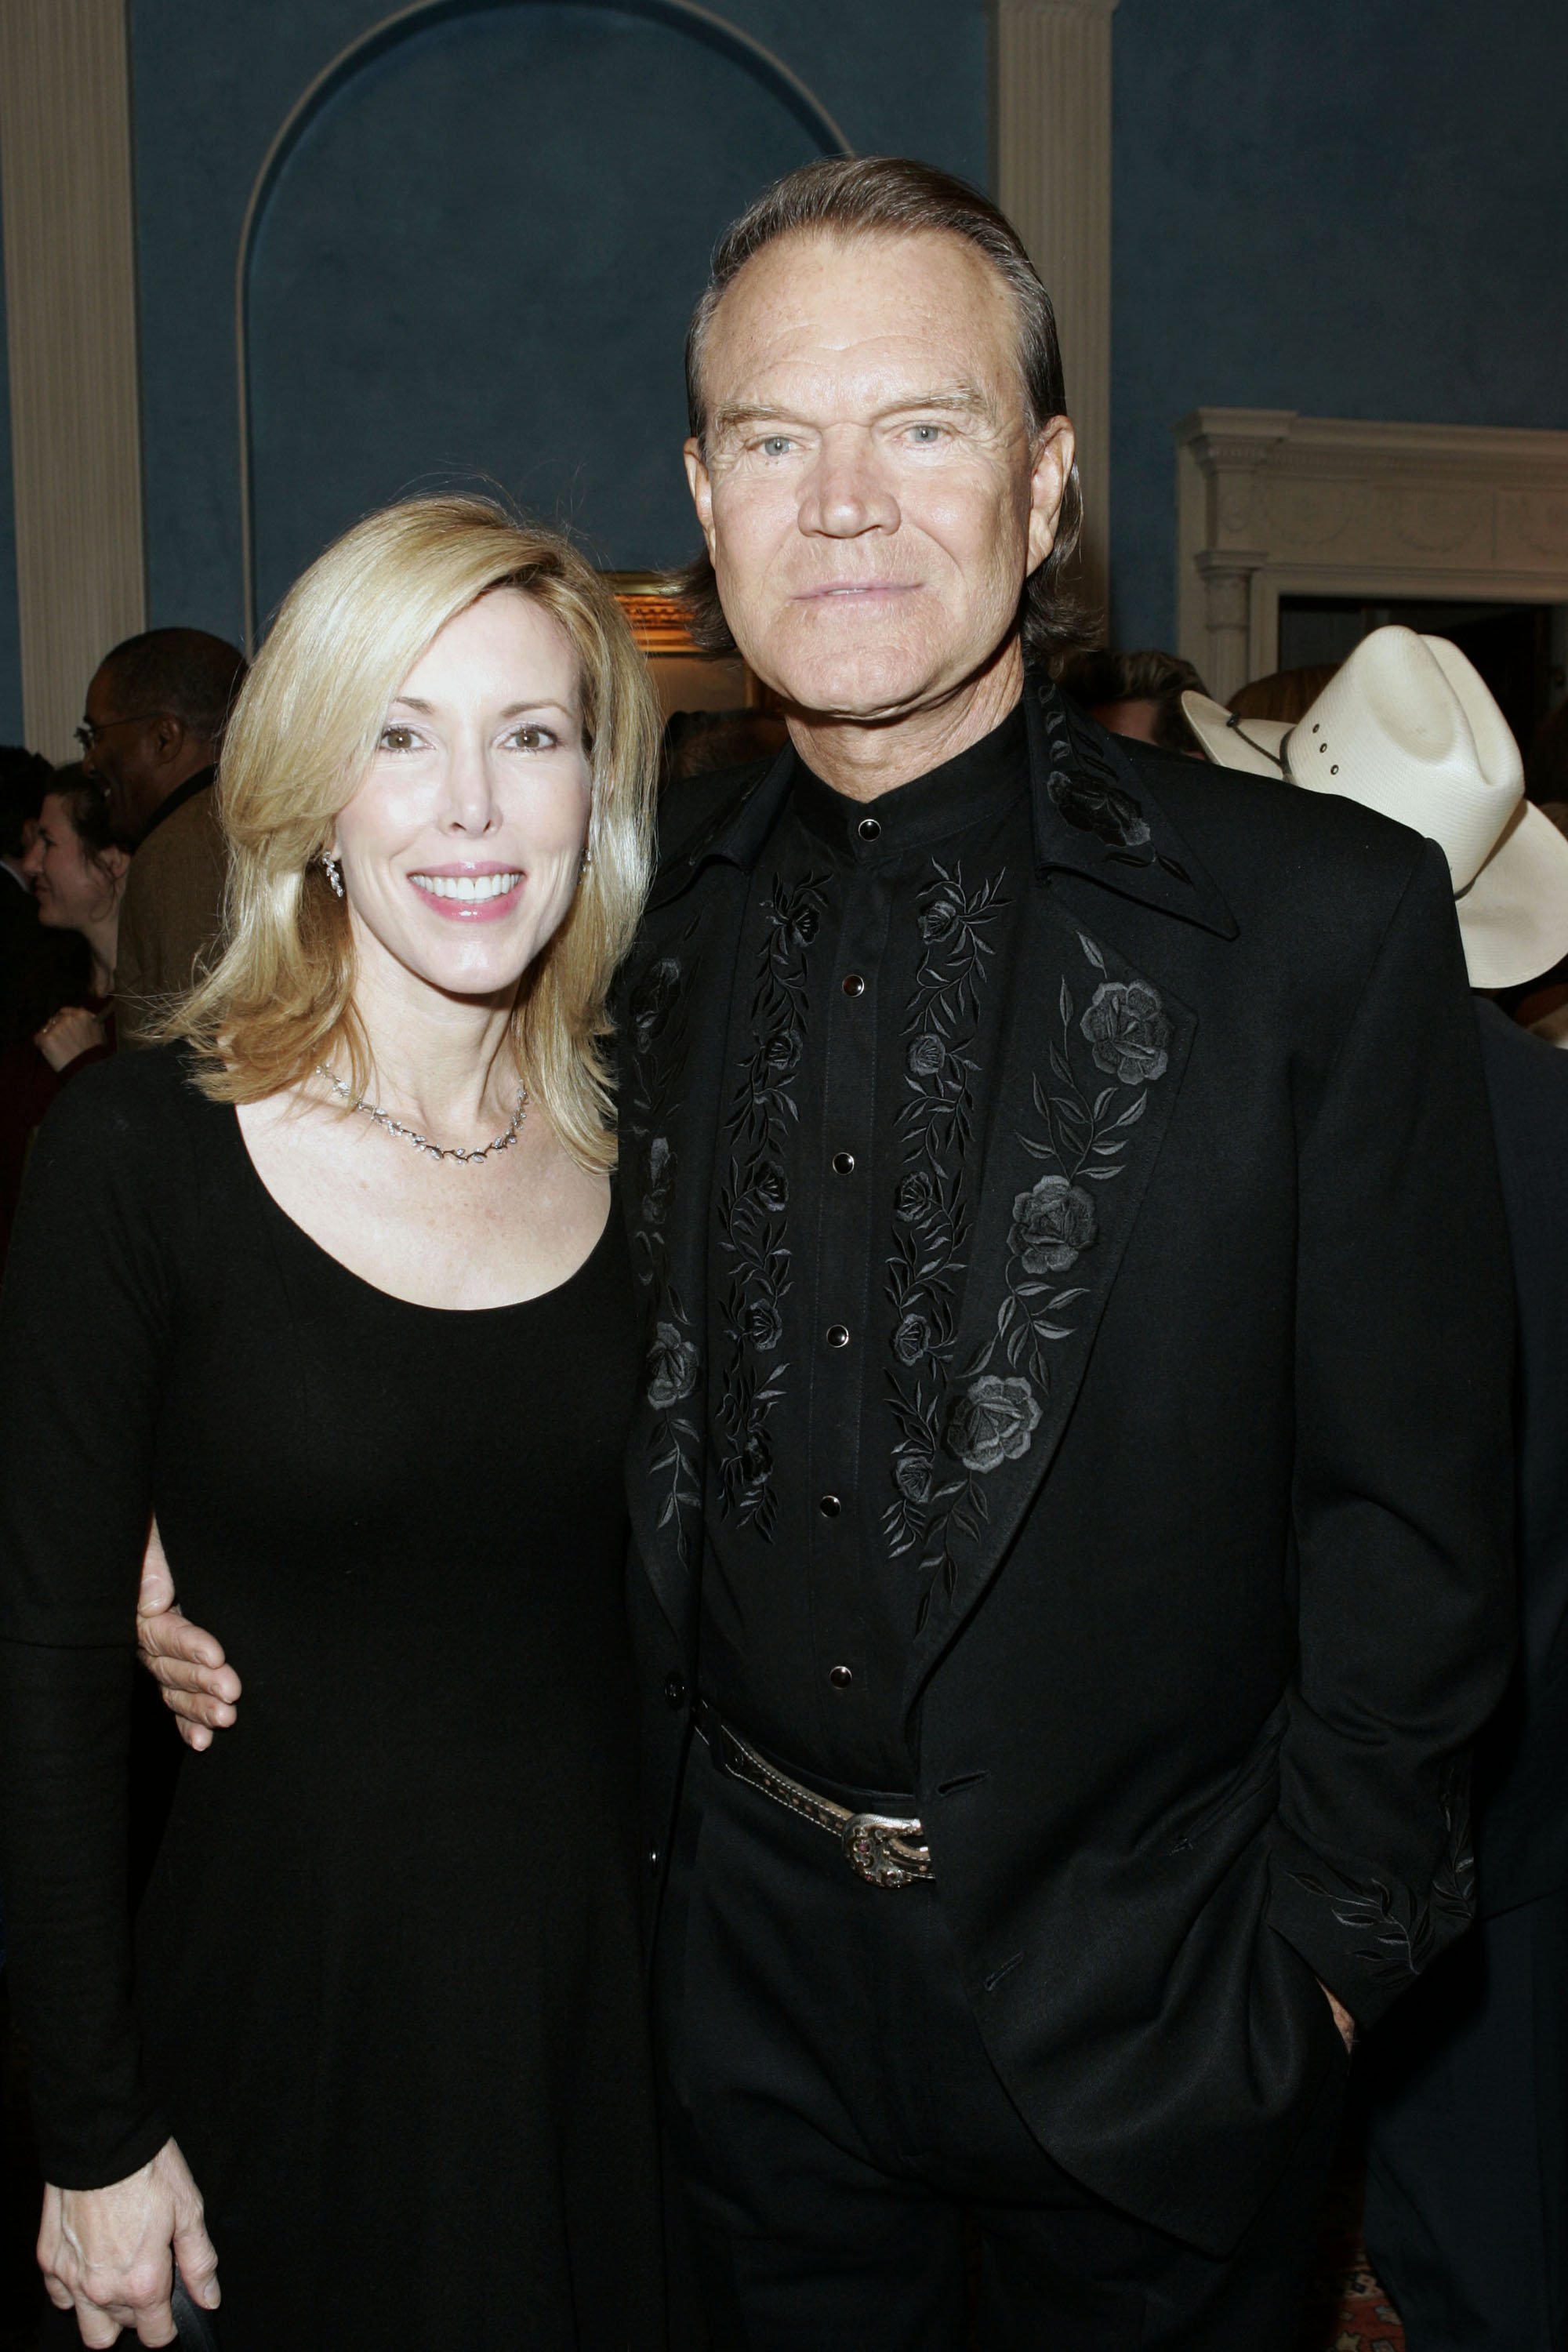 The late singer Glen Campbell and his wife Kim Campbell | Photo: Getty Images